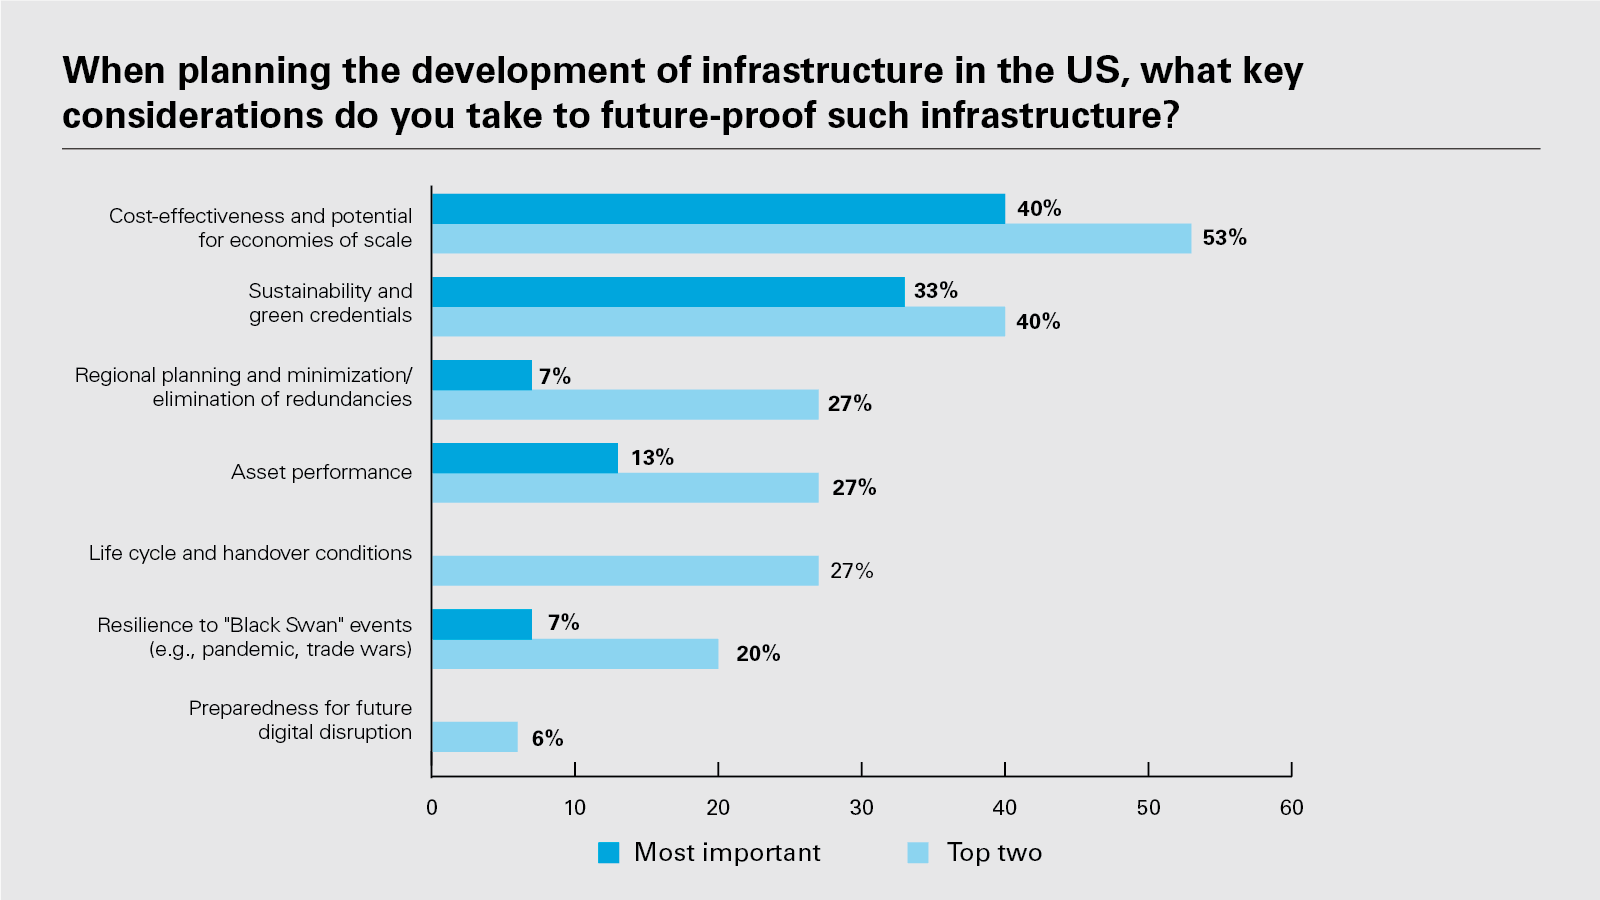 When planning the development of infrastructure in the US, what key considerations do you take to future-proof such infrastructure?